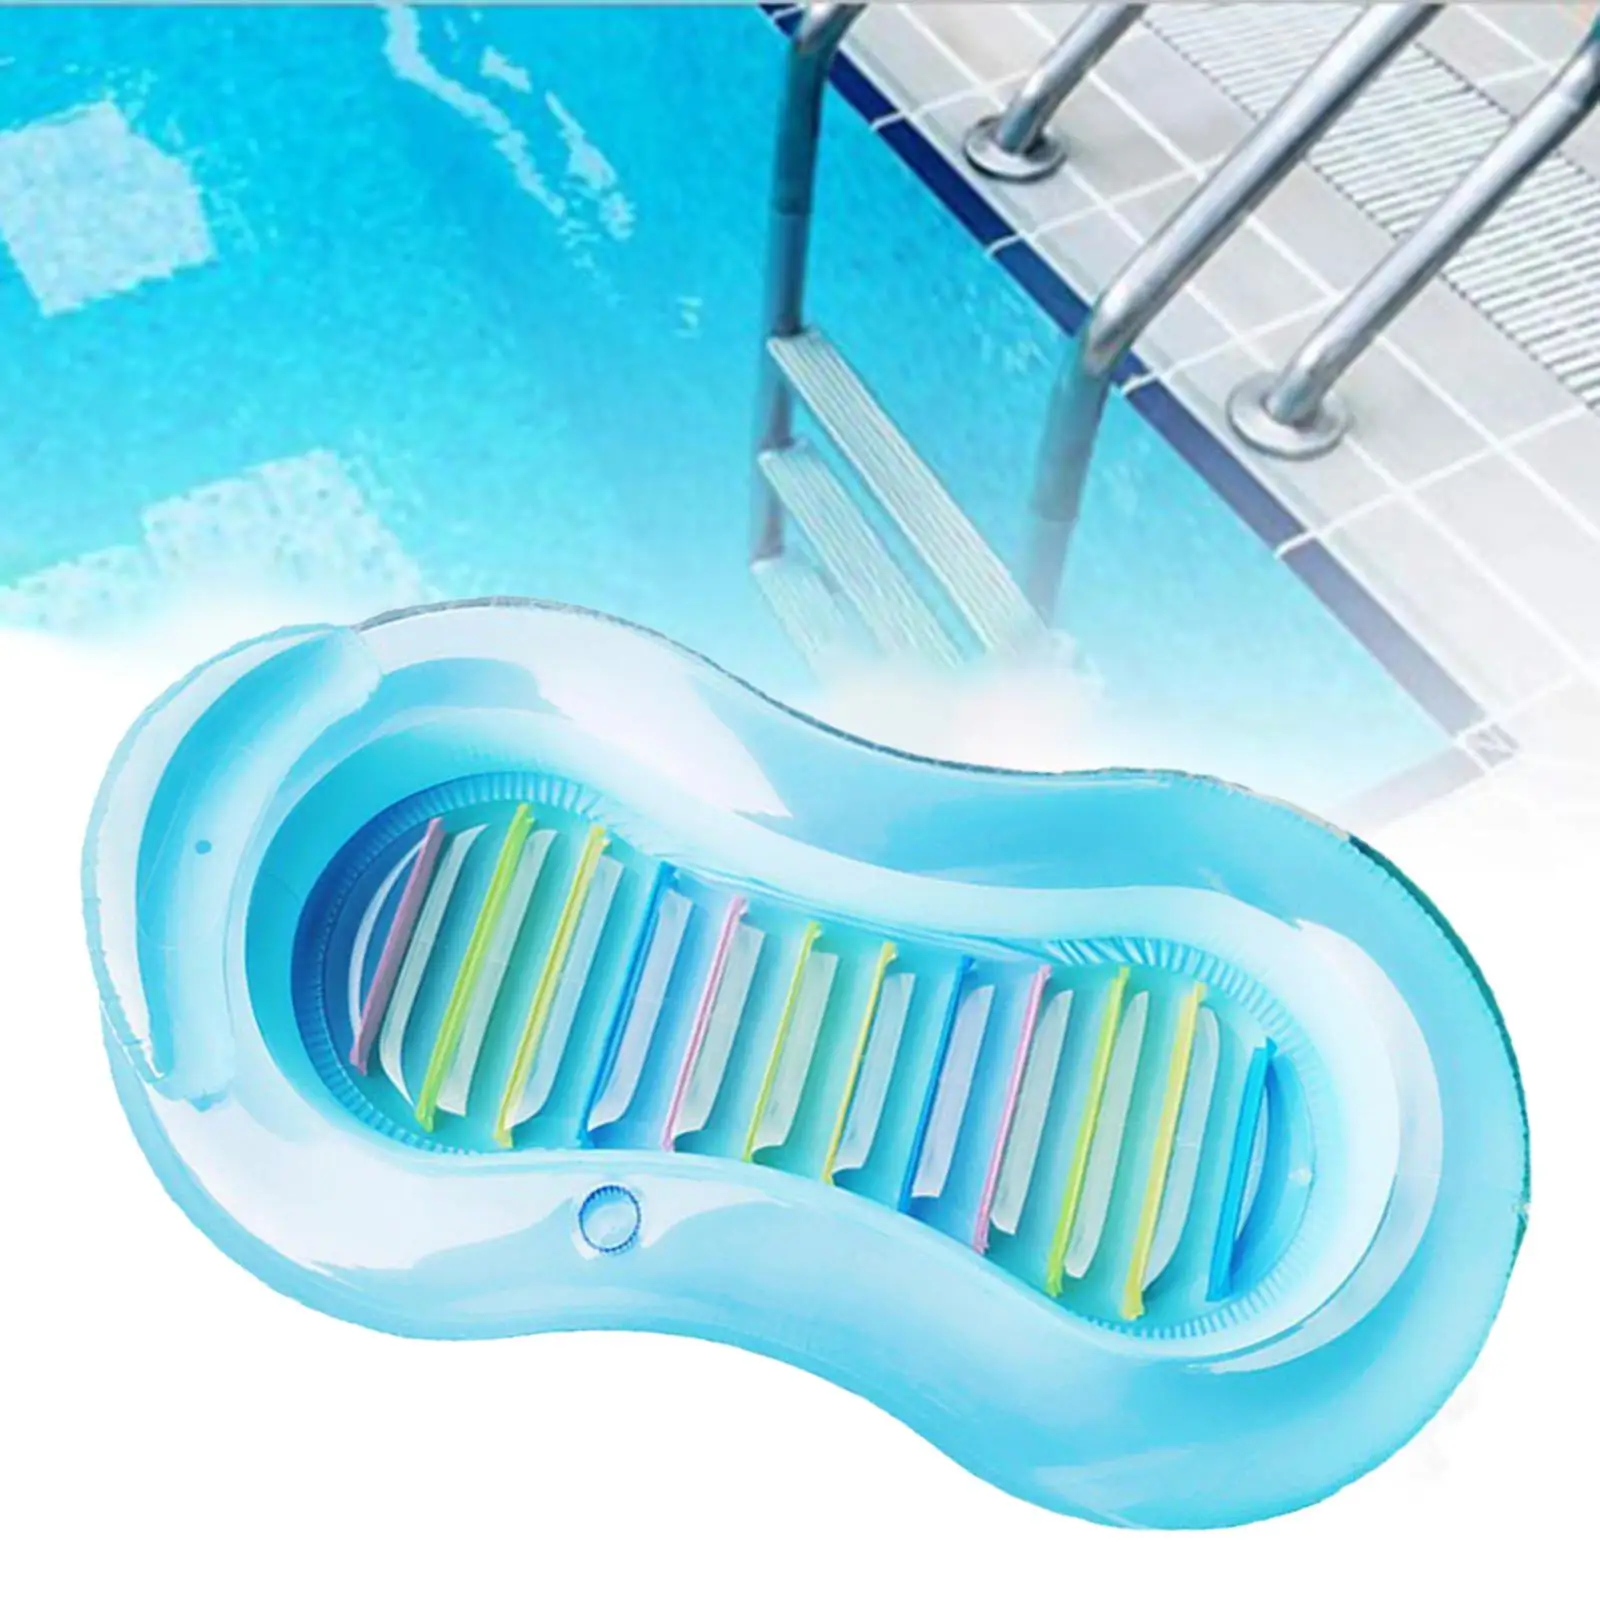 PVC Inflatable Floats Inflatable Lounge Chair Water Mattress Mat Floating Rafts Inflatable Hammock for Outdoor